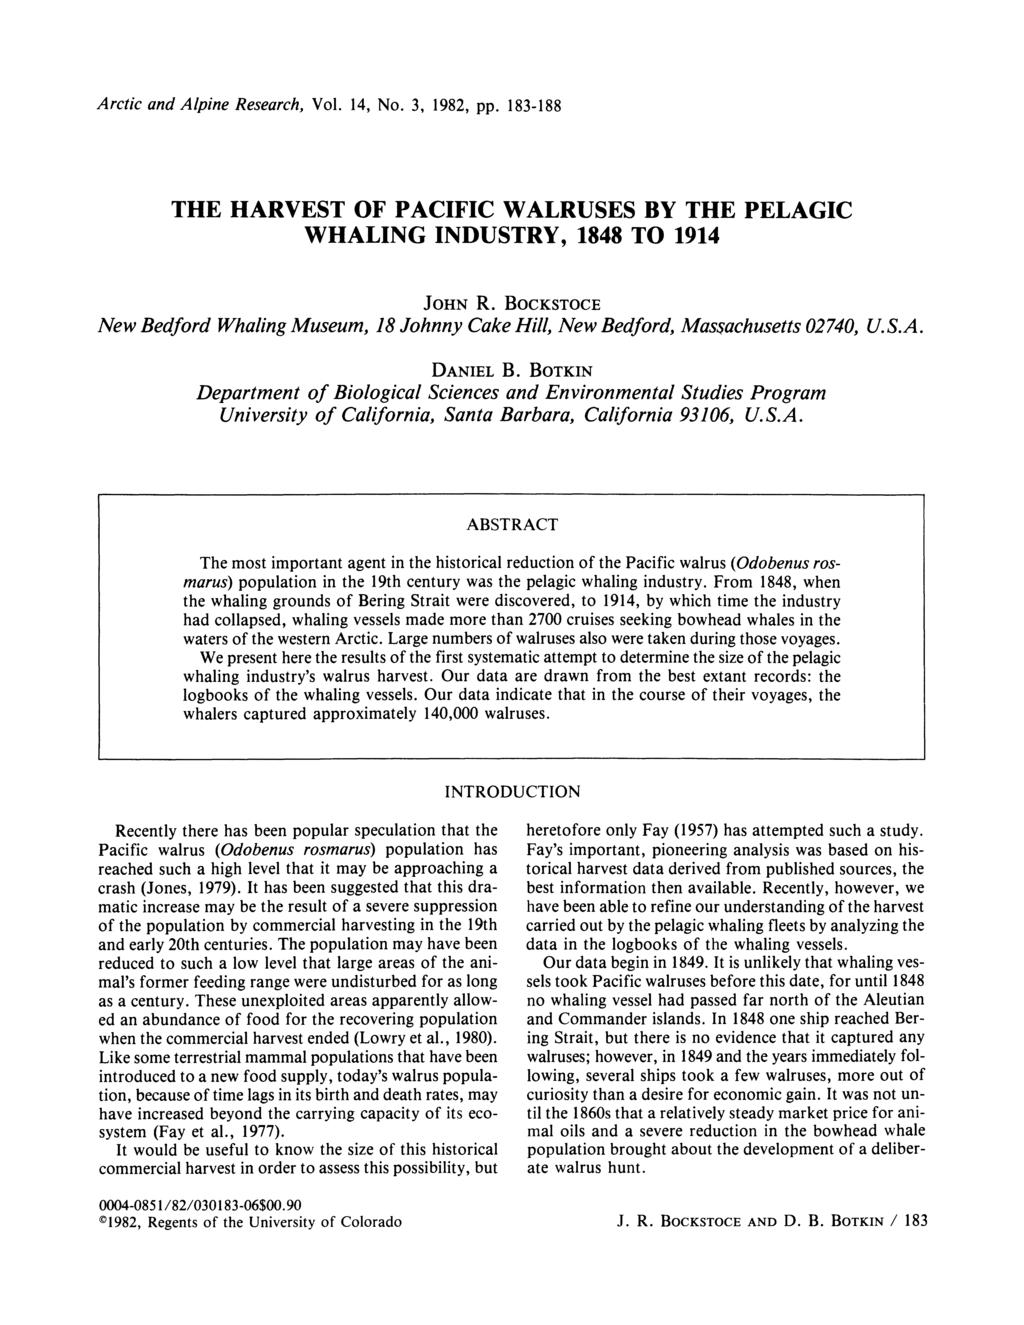 Arctic and Alpine Research, Vol. 14, No. 3, 1982, pp. 183-1 88 THE HARVEST OF PACIFIC WALRUSES BY THE PELAGIC WHALING INDUSTRY, 1848 TO 1914 JOHNR.